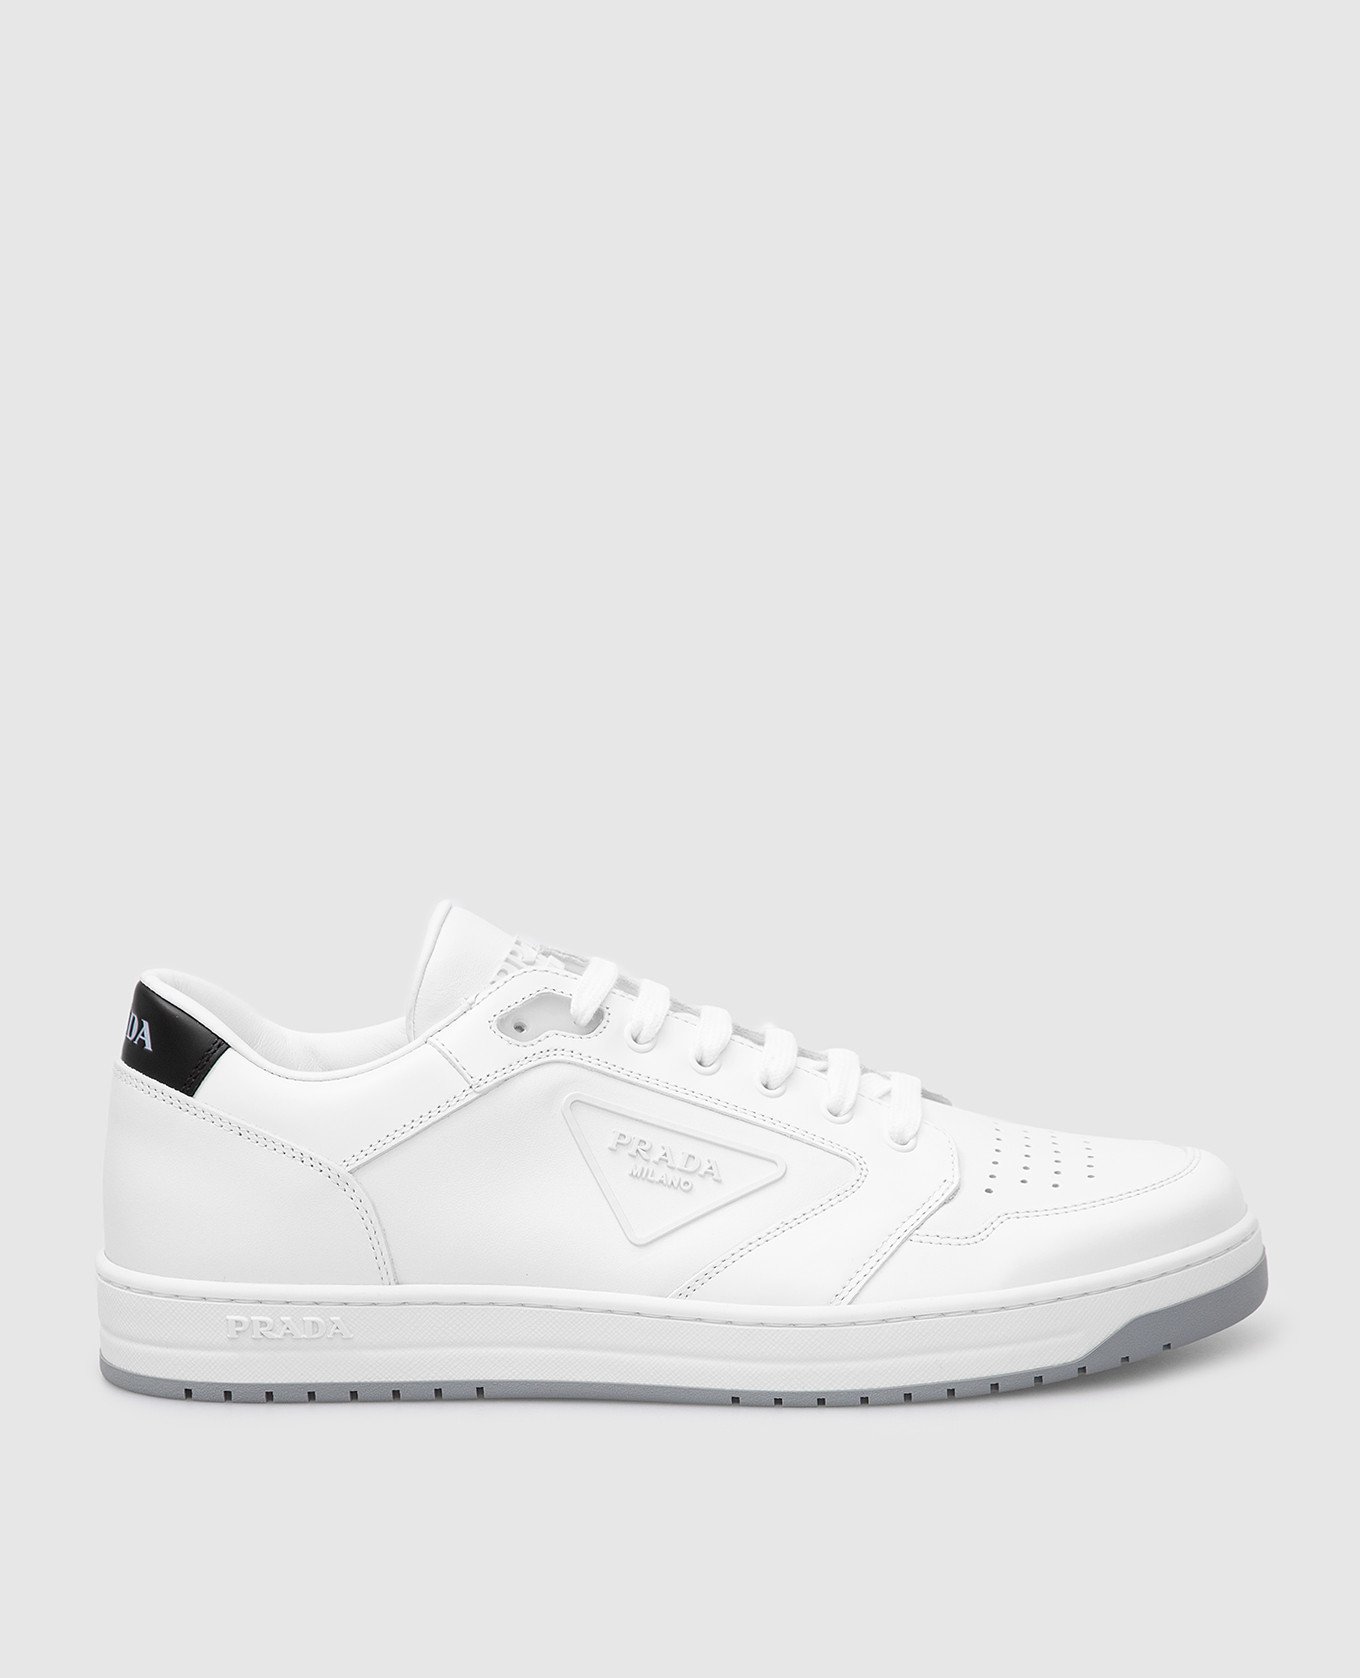 Prada - Downtown leather sneakers with logo 2EE3633LJ6 buy at Symbol